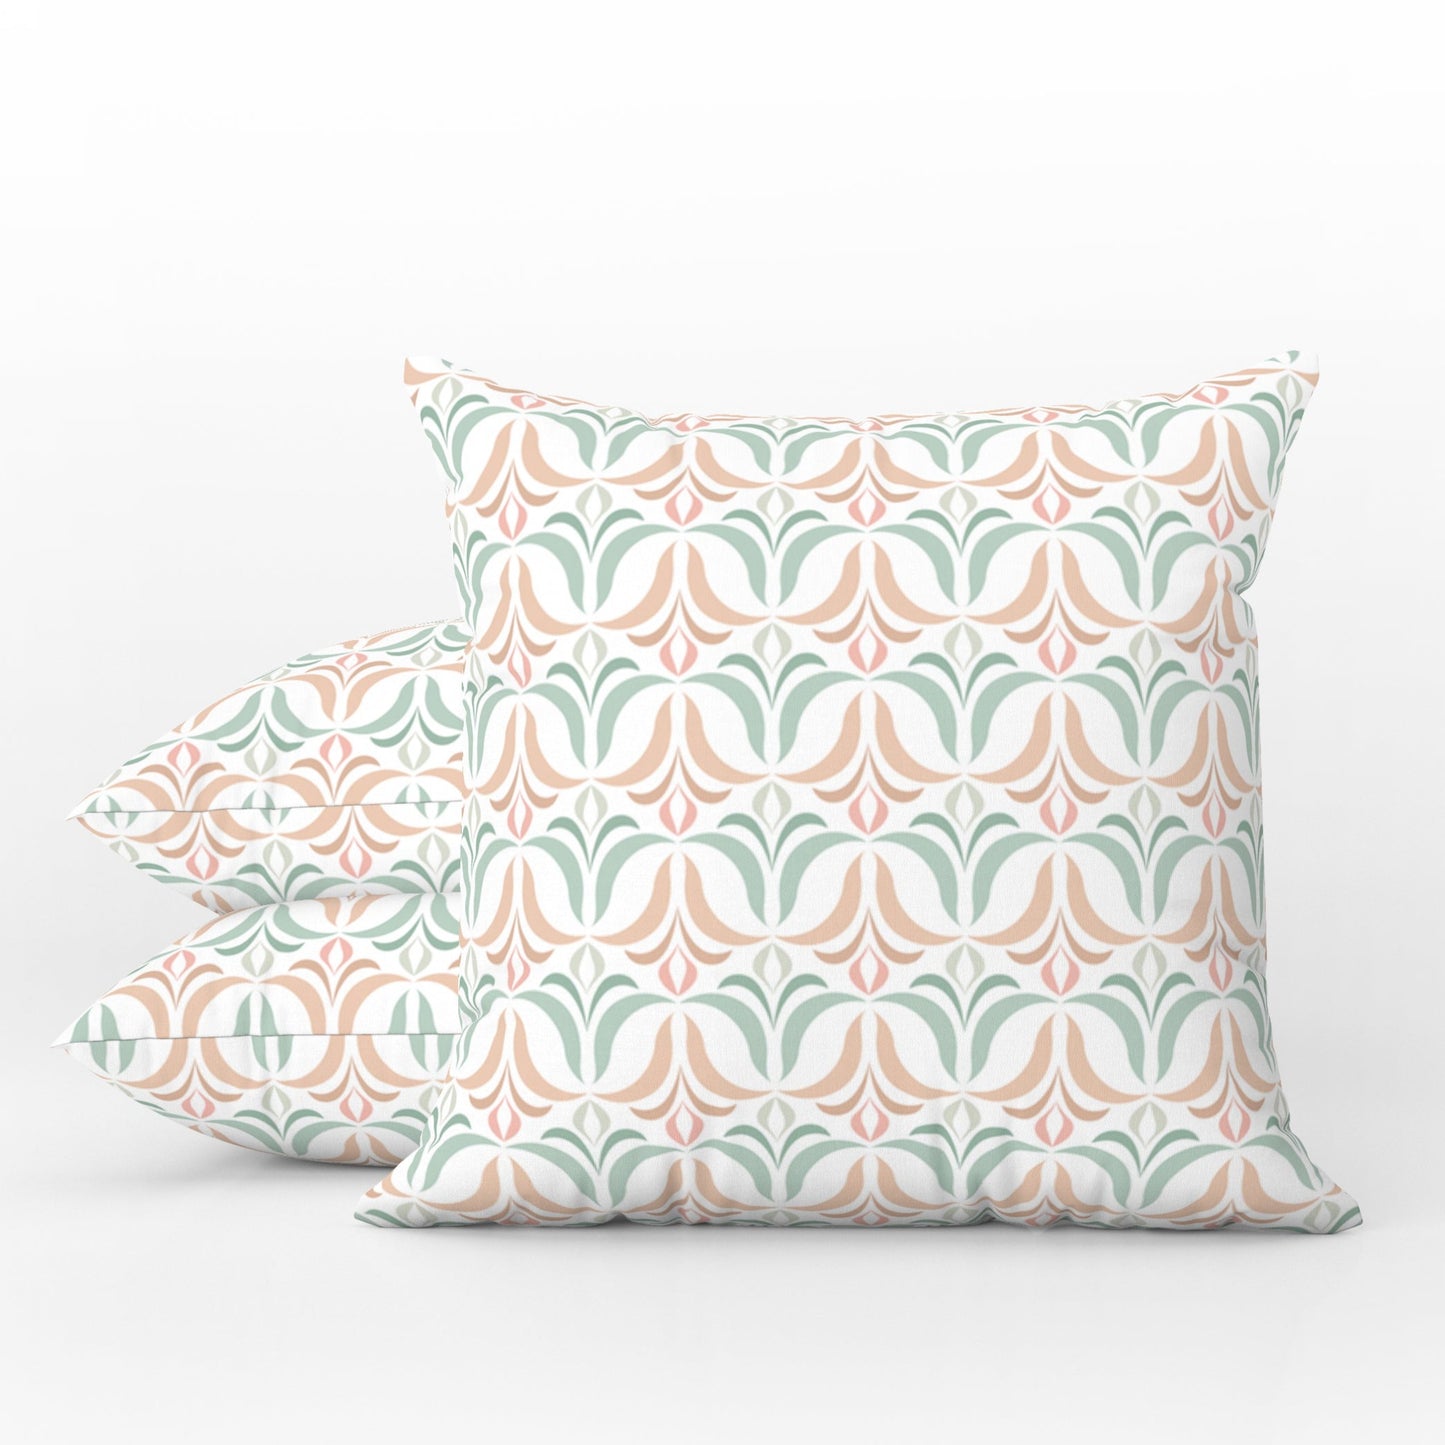 Retro Floral Outdoor Pillows Pink Mint